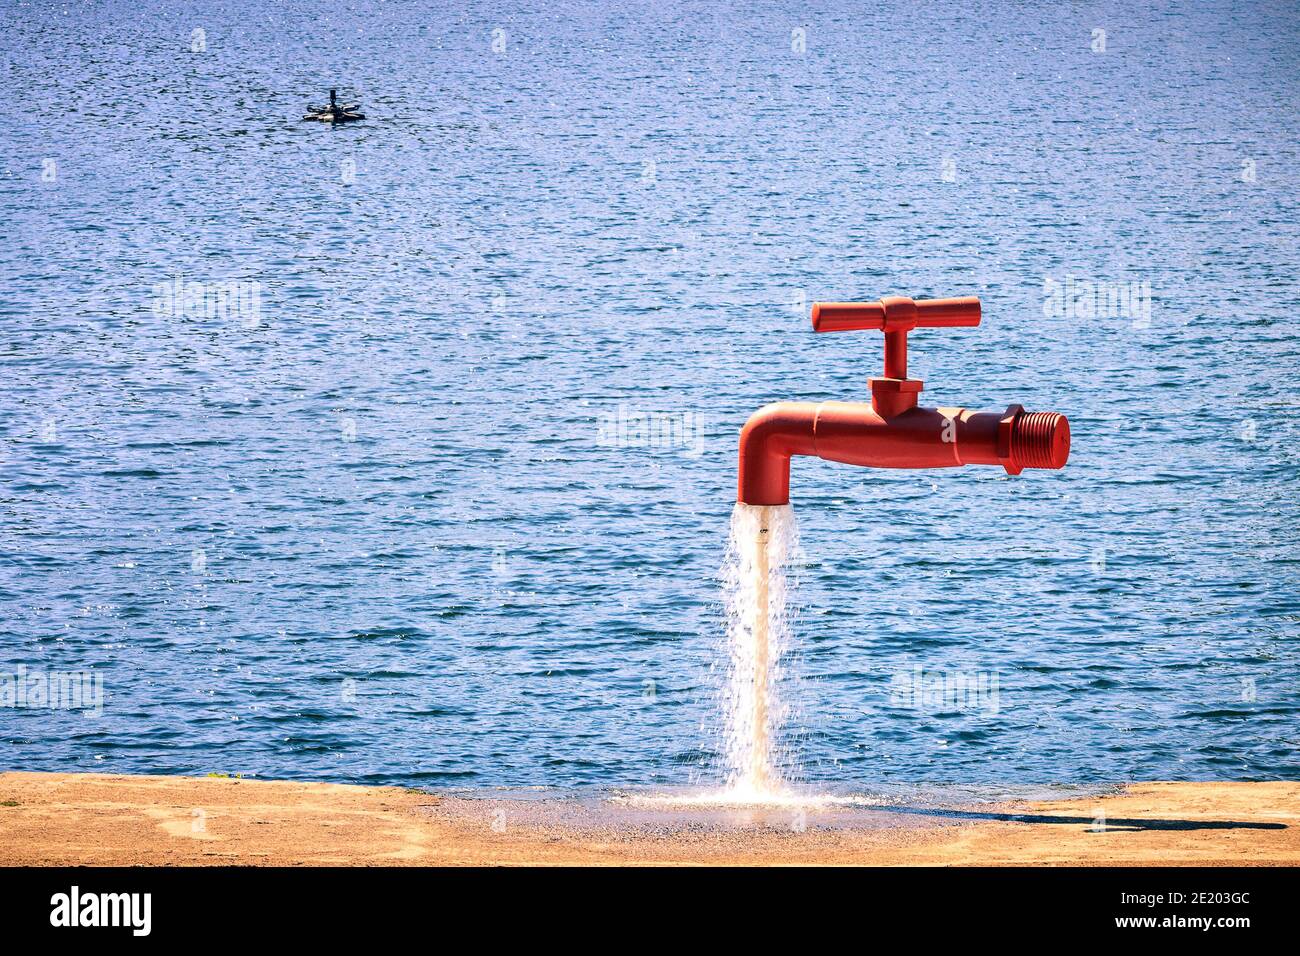 Termas de São Pedro do Sul, Portugal - August 5, 2020: Fountain with the  shape of a giant red faucet pouring water Stock Photo - Alamy